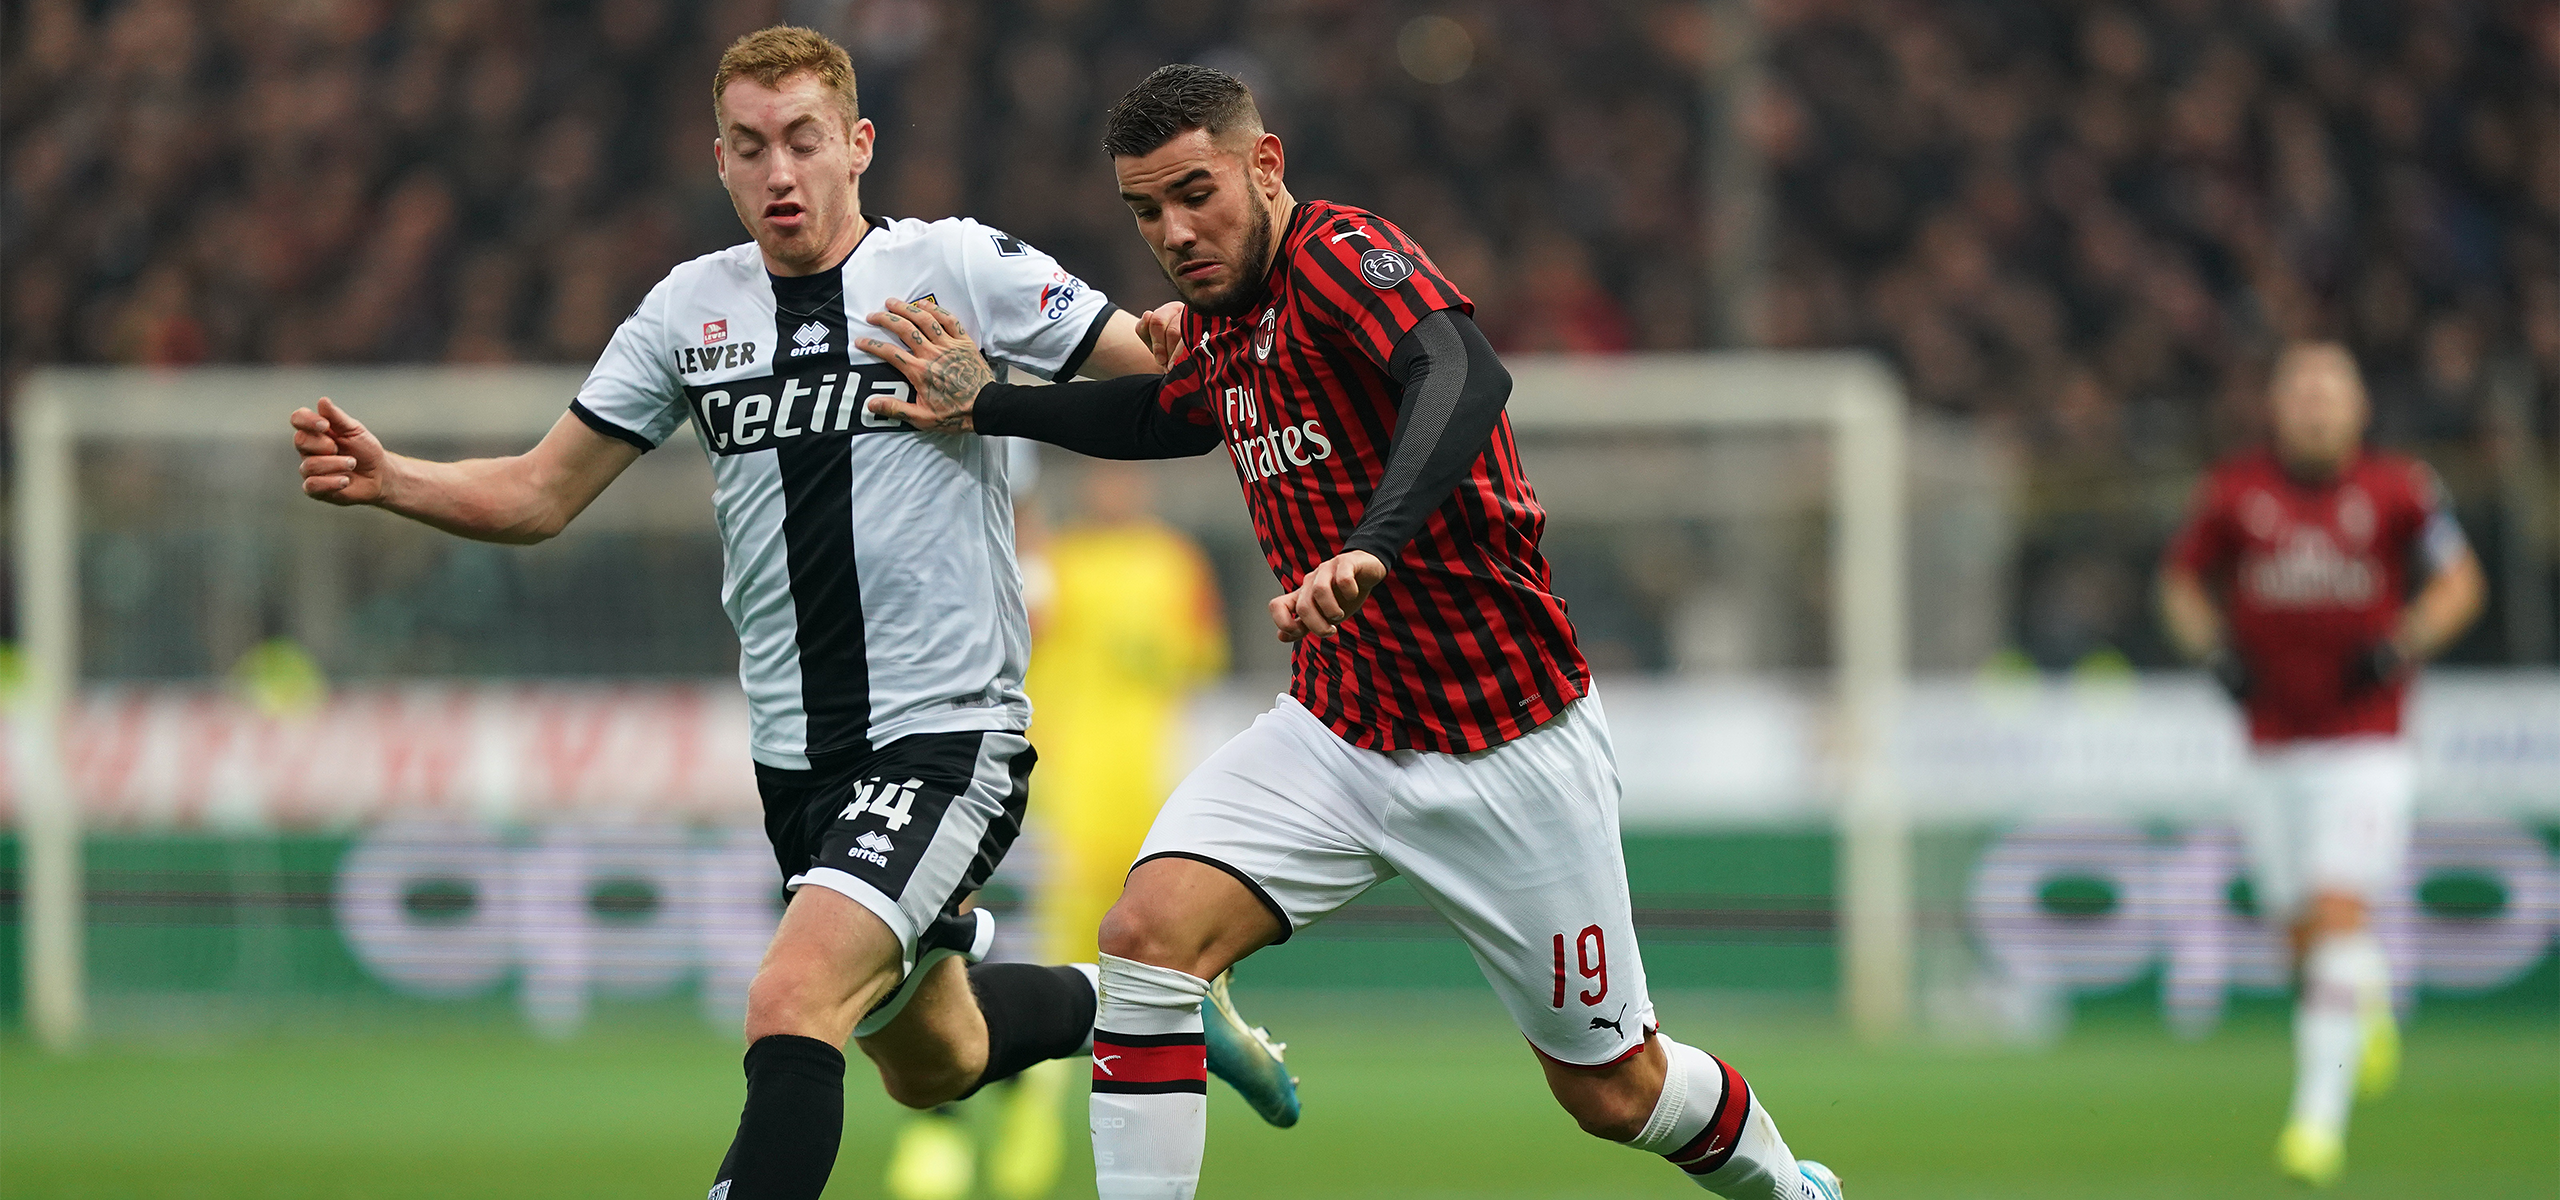 AC Milan v Parma, Serie A TIM 2019/2020: facts and figures | AC Milan